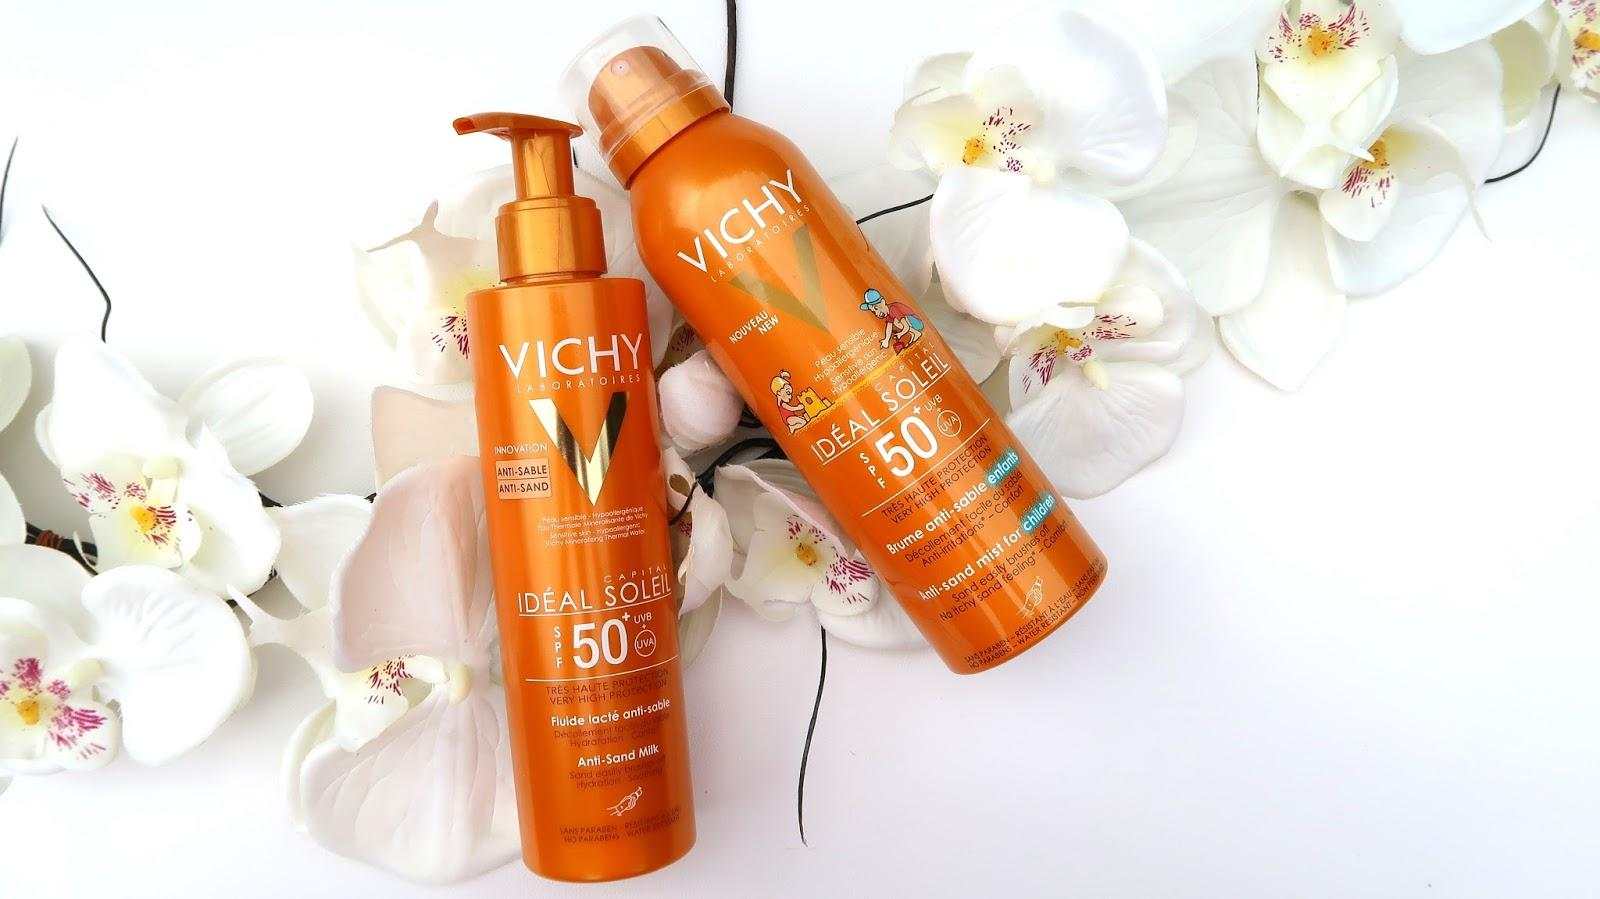 6. XỊT CHỐNG NẮNG VICHY SPF 50 PA+++ IDEAL SOLEIL FACE MIST